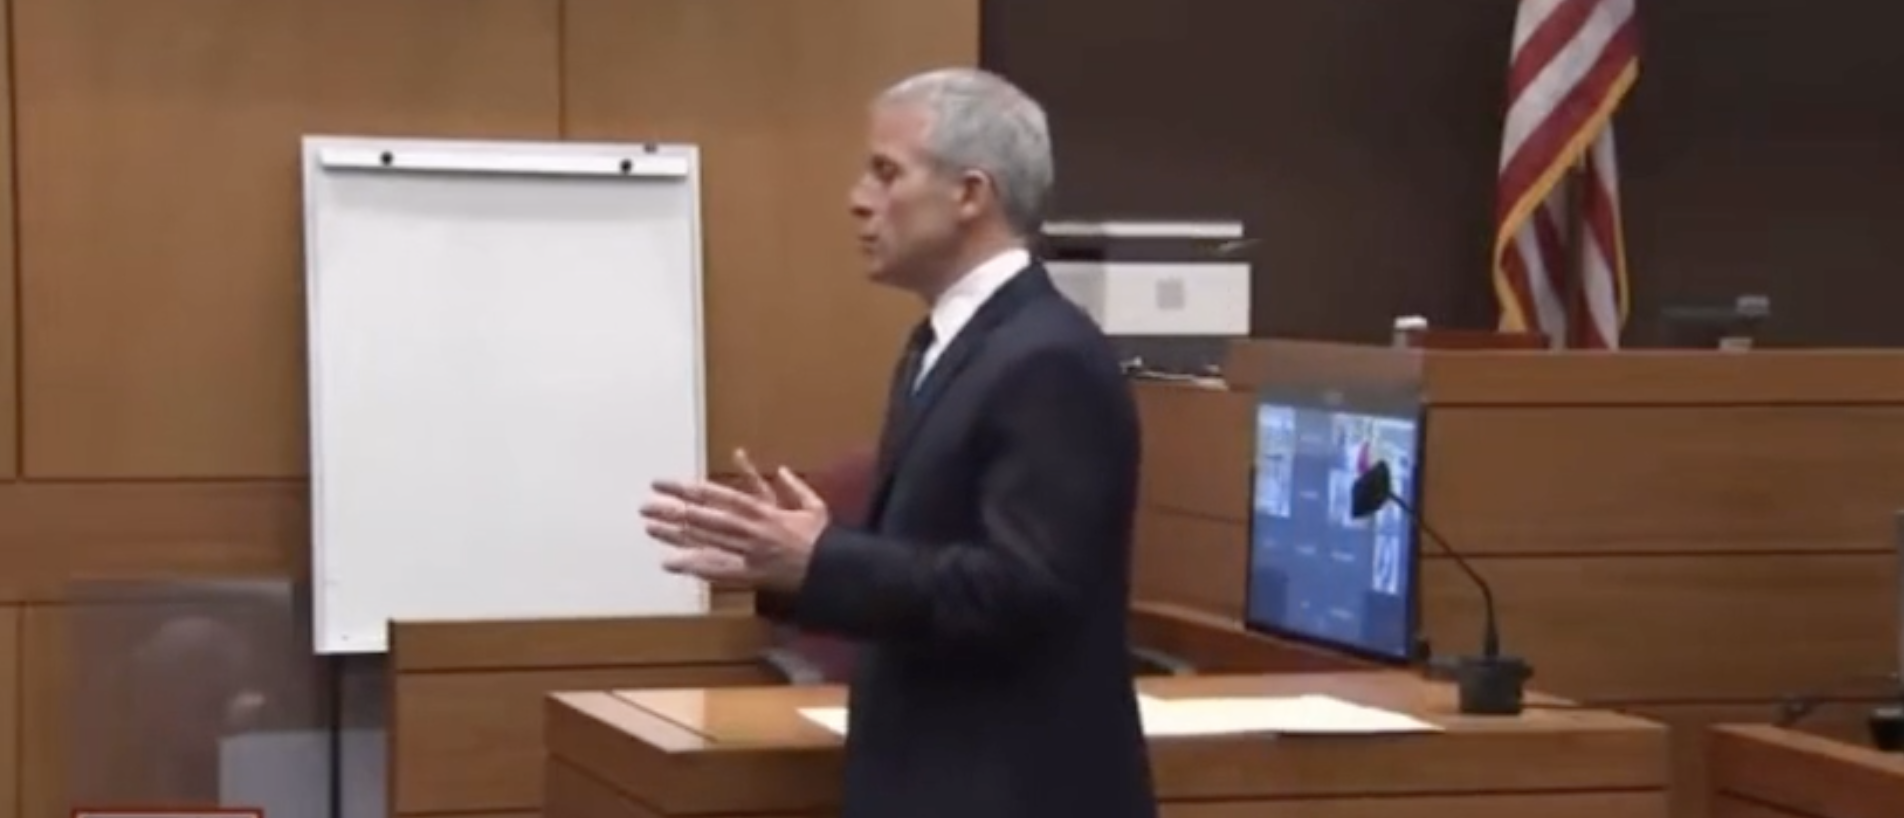 Rapper’s Lawyer Has One Of The Most Memorable Courtroom Spin Zones Of All Time